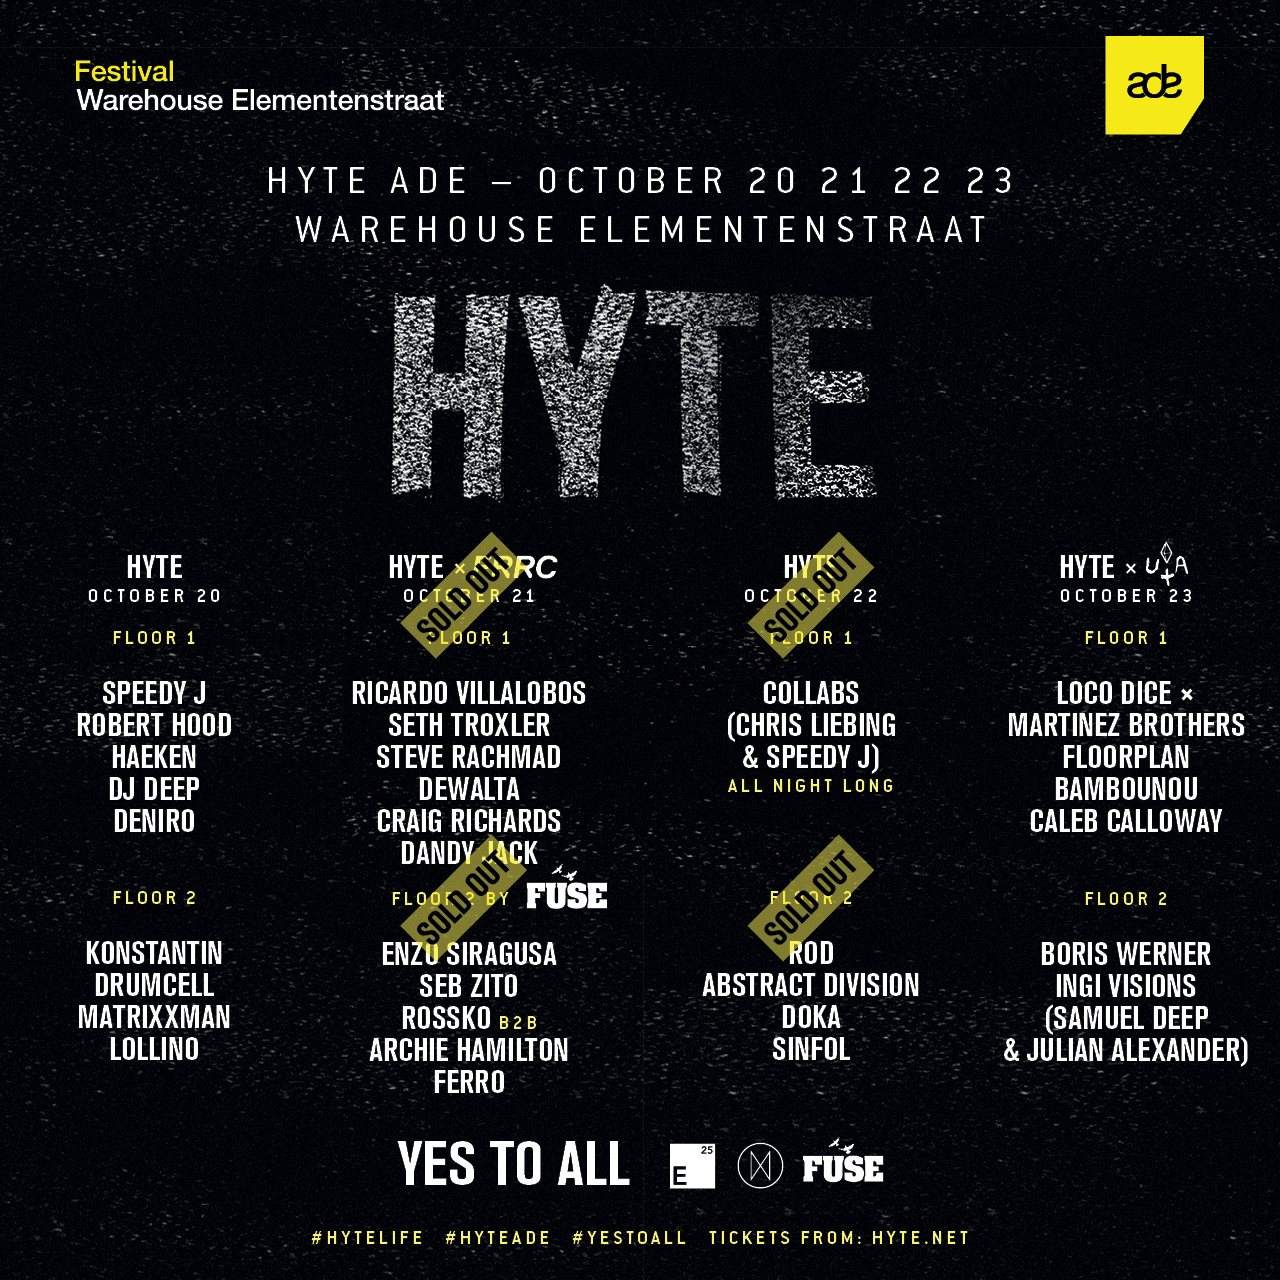 HYTE ADE with Collabs (Chris Liebing & Speedy J), ROD, Abstract Division - Página frontal